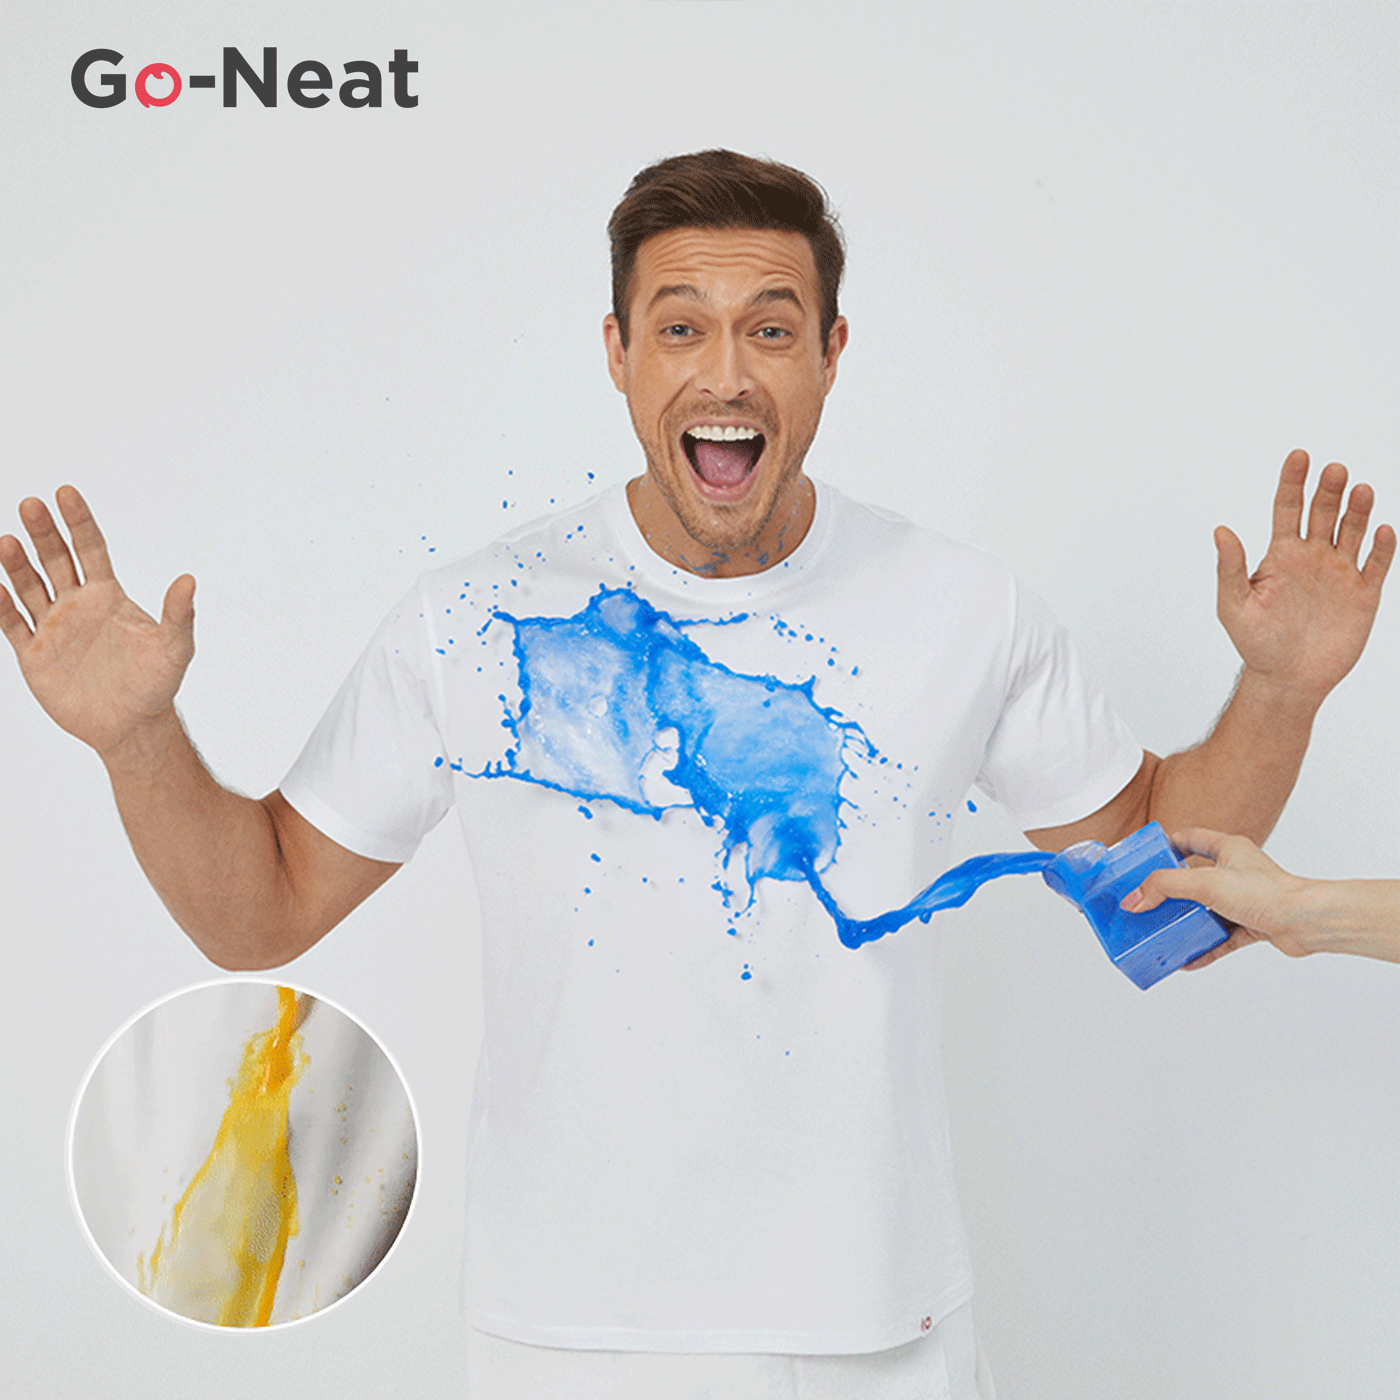 Go-Neat Water Repellent and Stain Resistant Adult Solid Tee